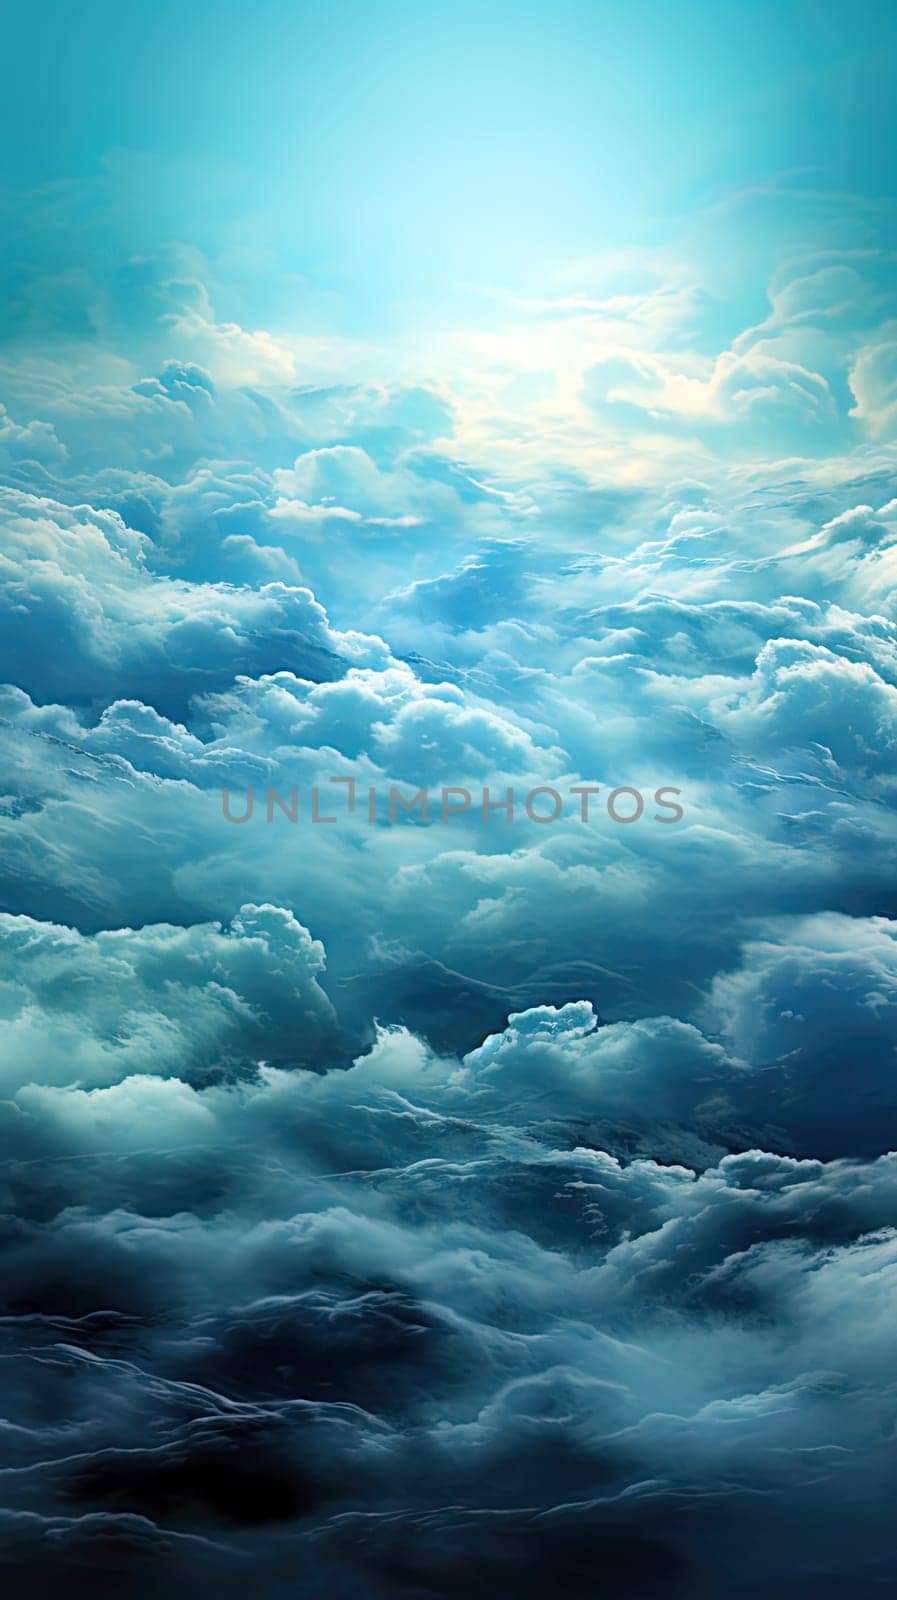 Blue watercolor background illustration by Dustick